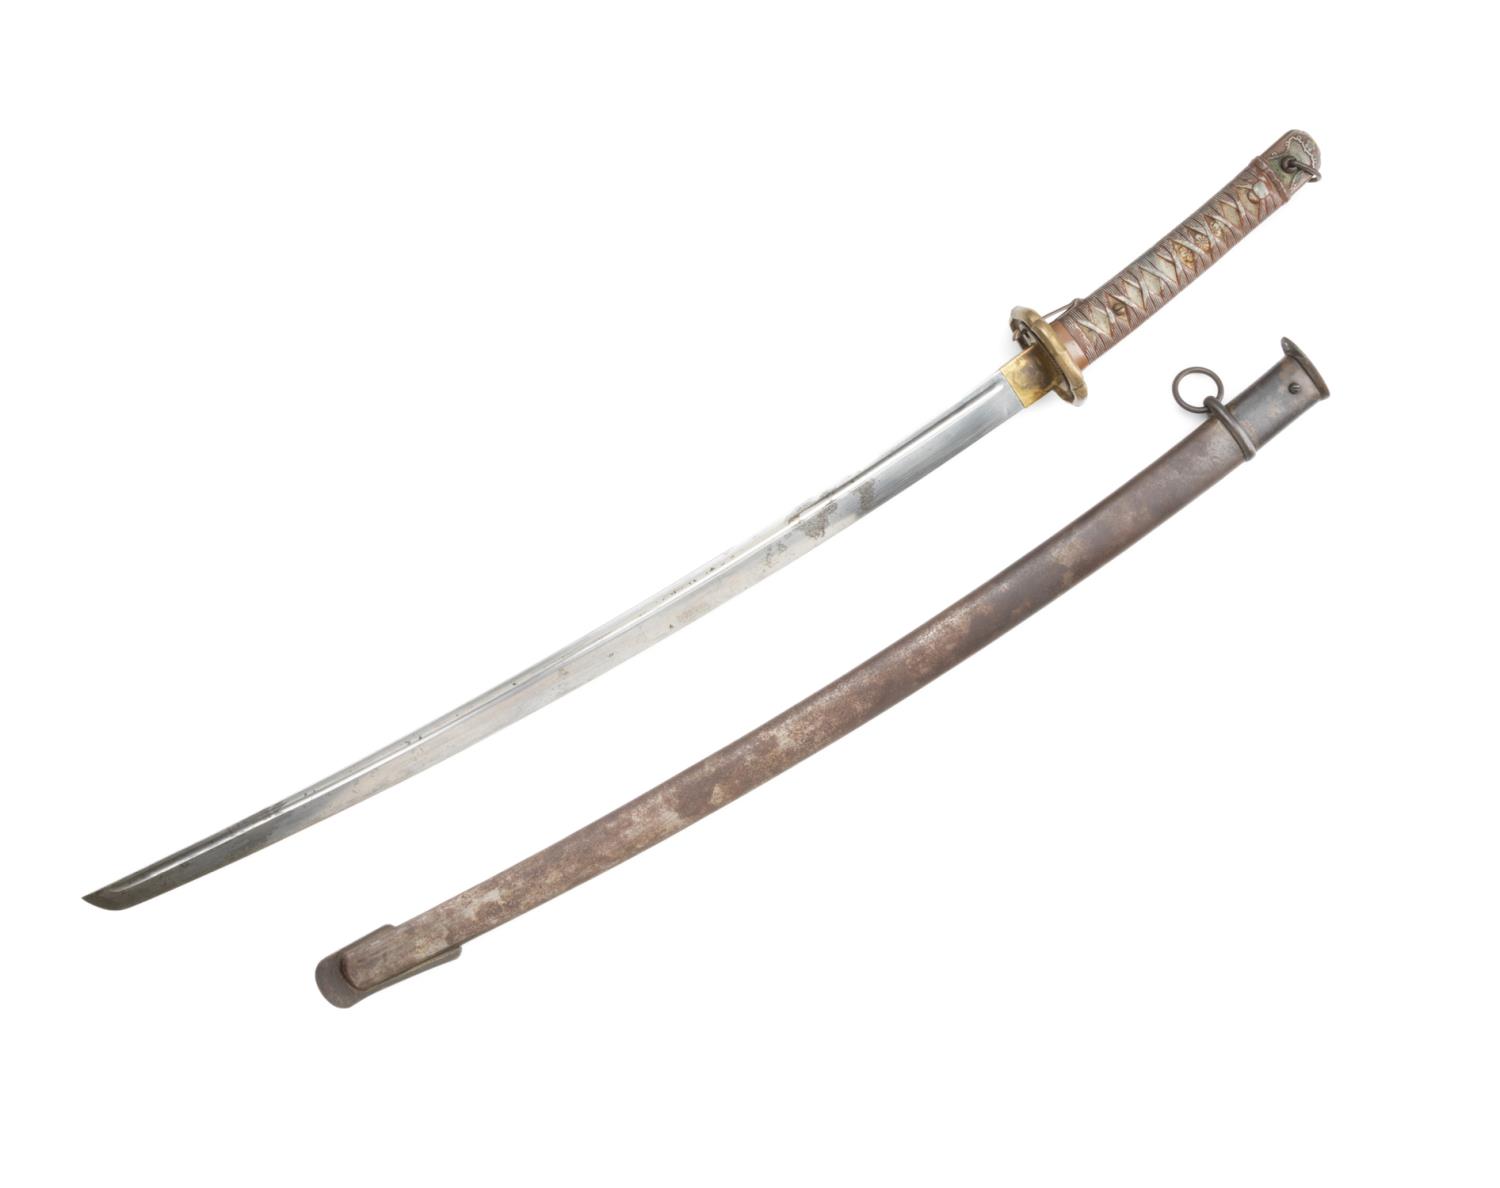 JAPANESE NON-COM OFFICERS SWORD, TOKYO